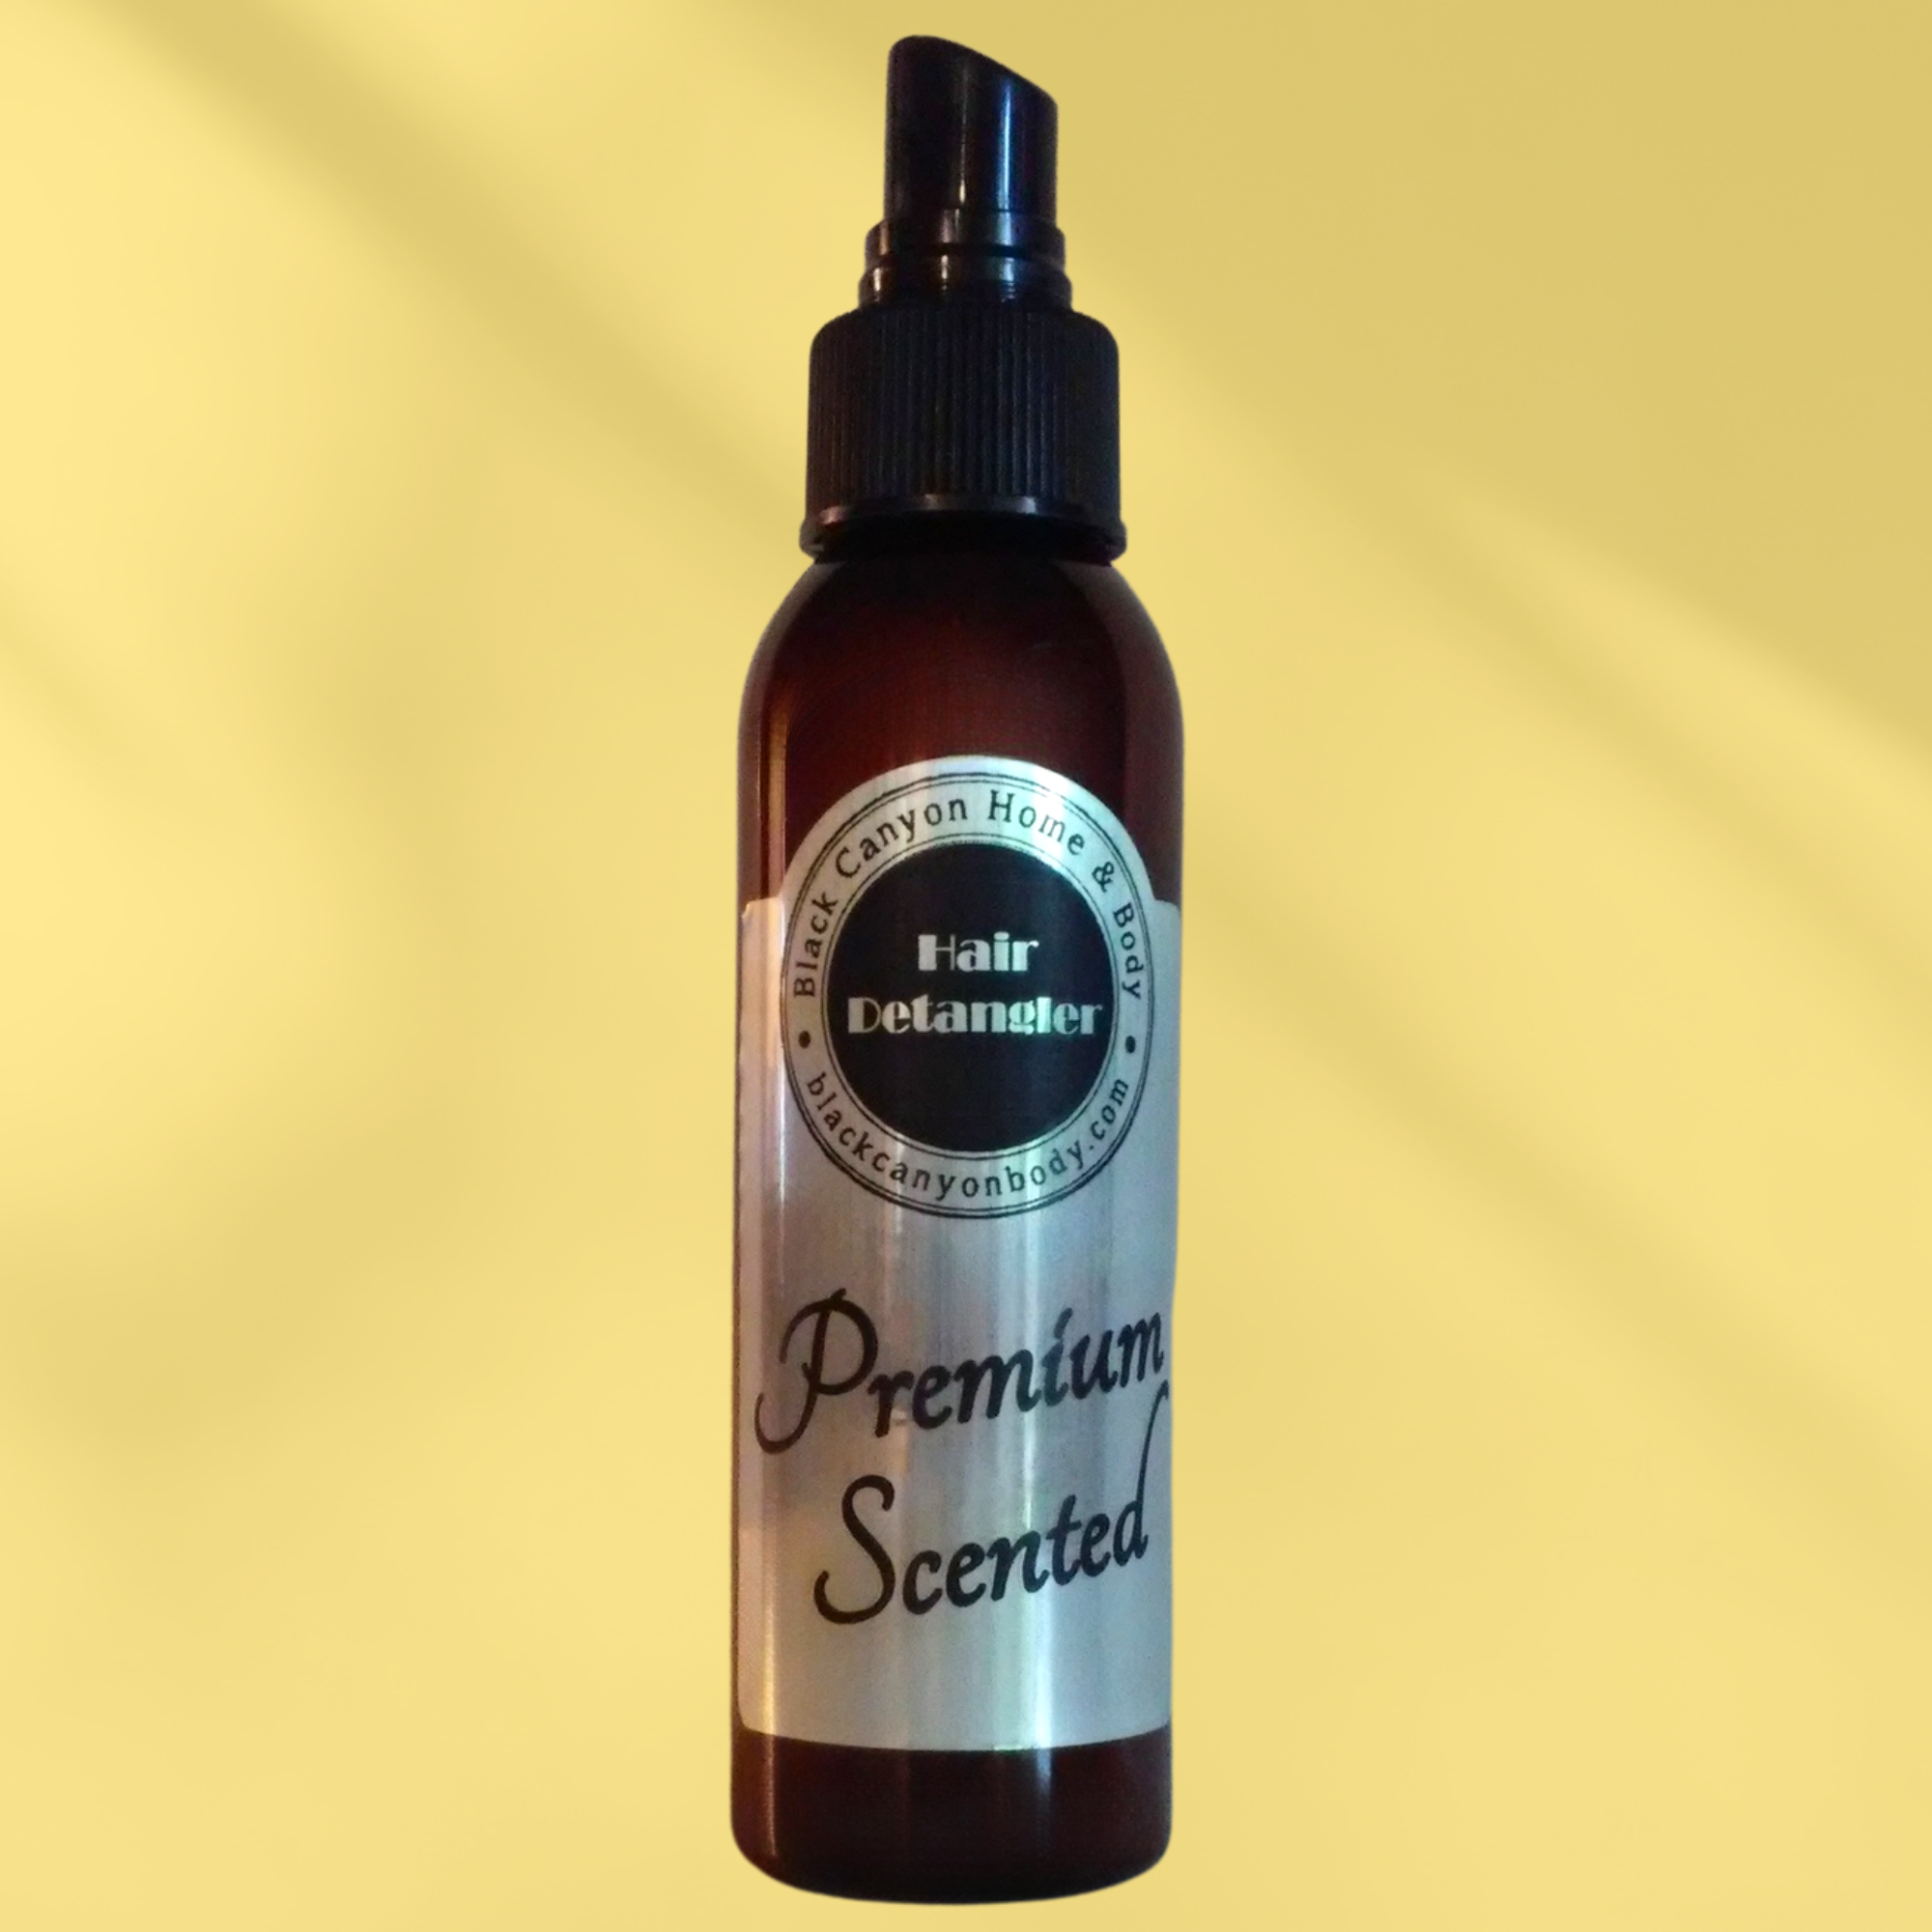 Black Canyon Apricot Slices Scented Hair Detangler Spray with Olive Oil